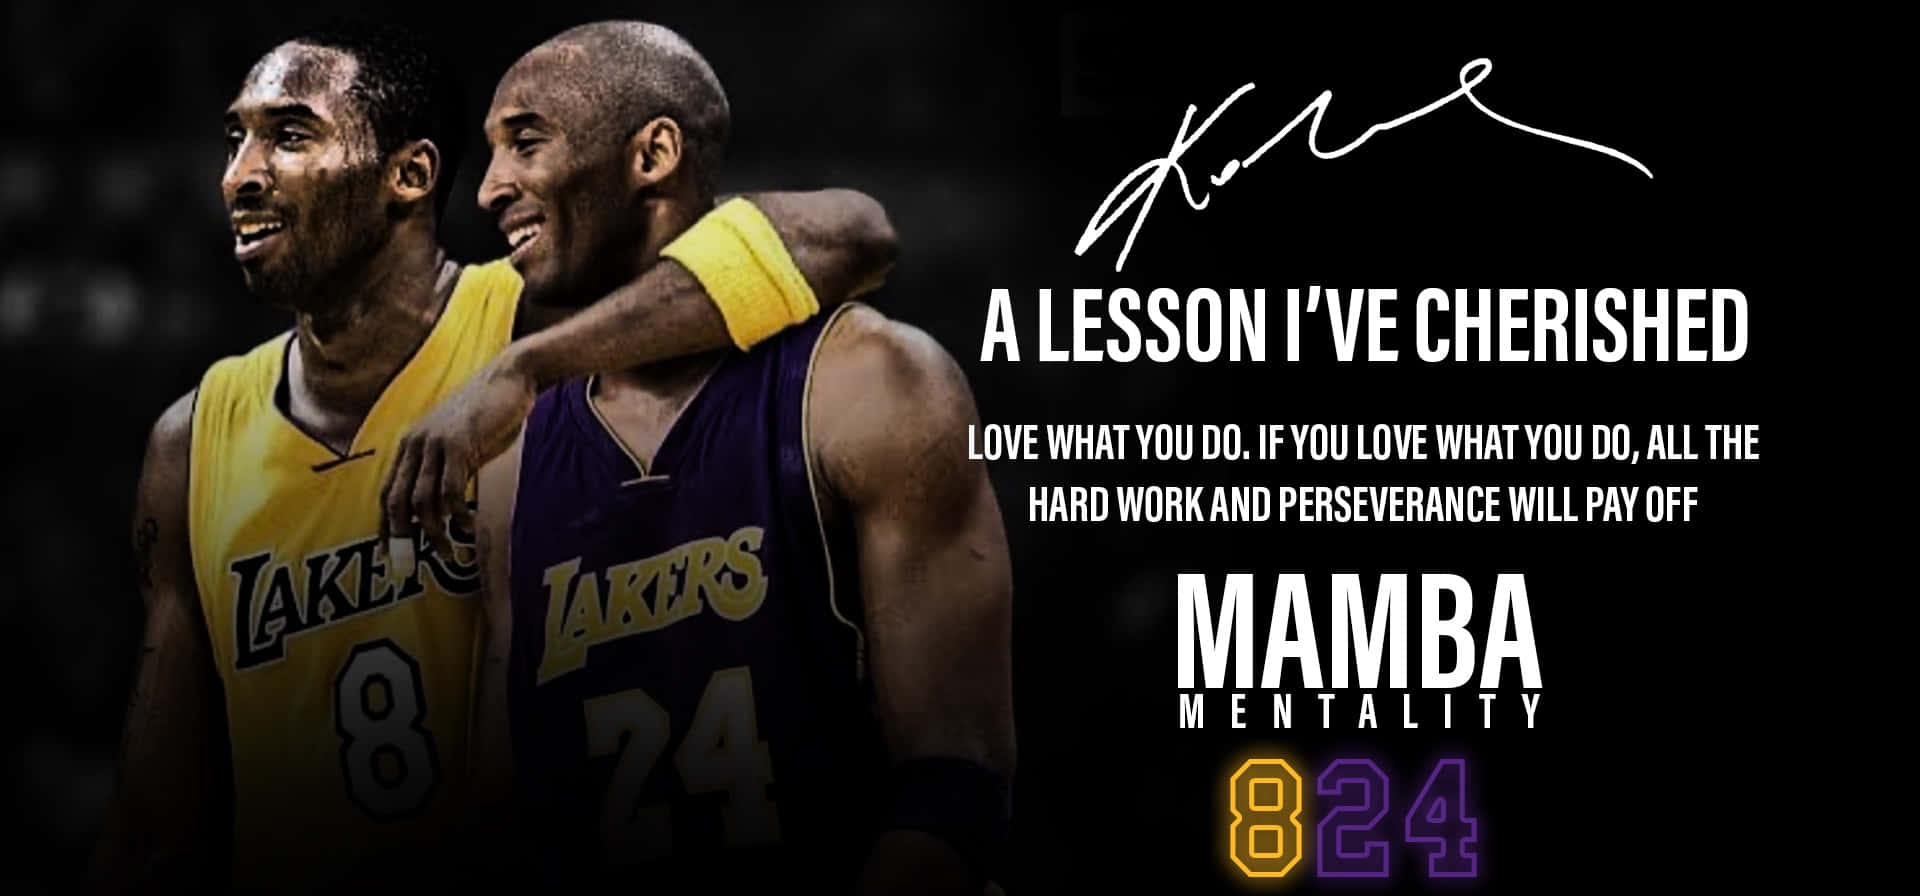 Live with the Mamba Mentality" Wallpaper